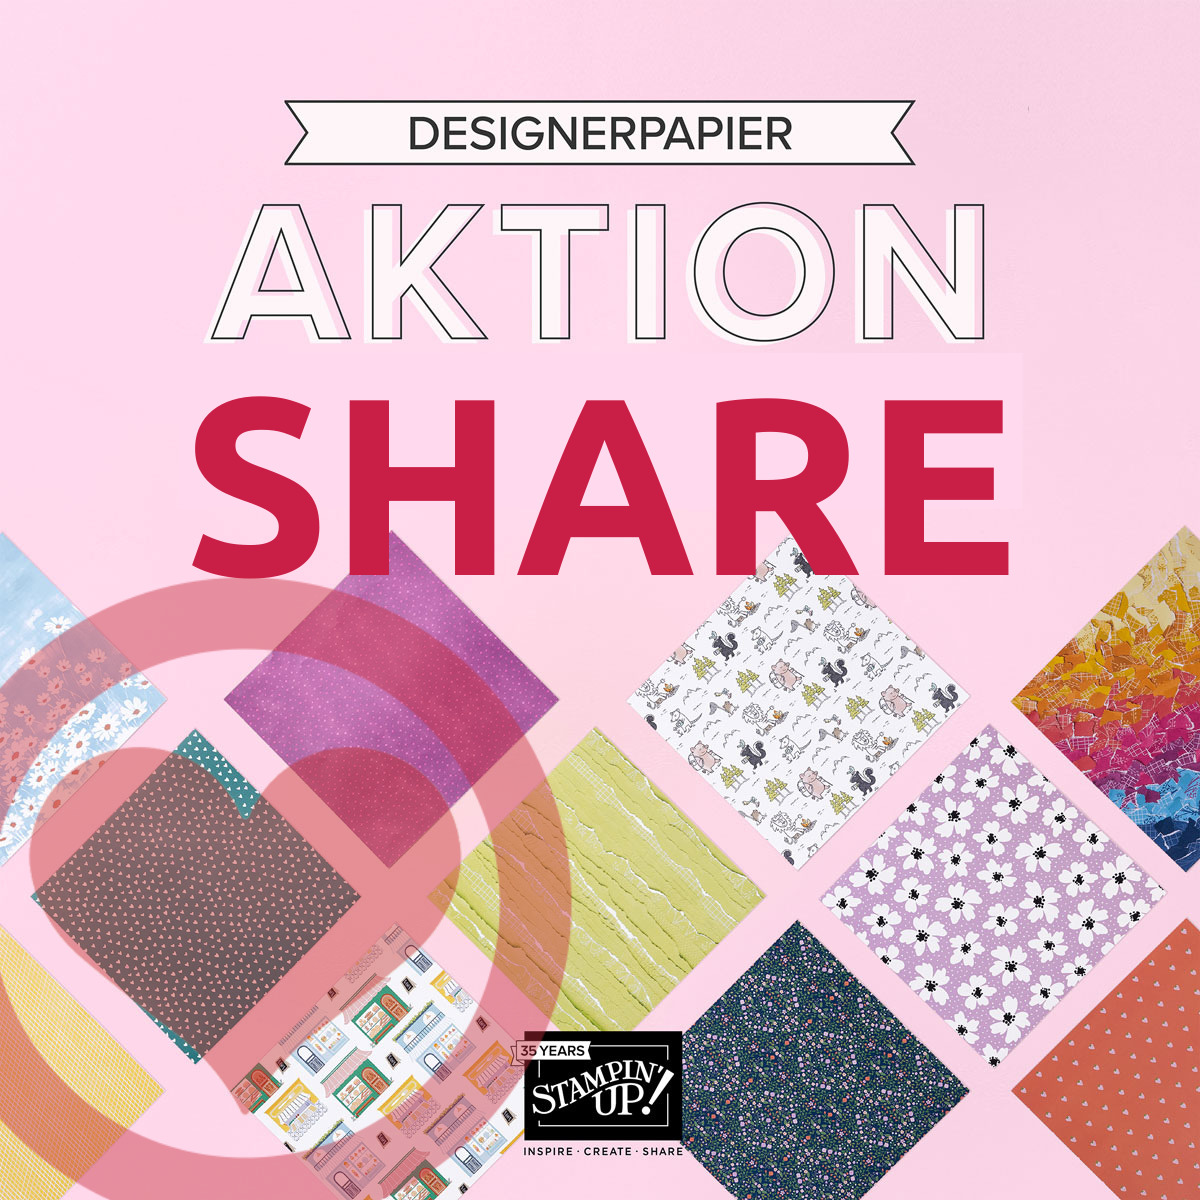 Read more about the article Share zur Stampin‘ Up! Designerpapier Aktion